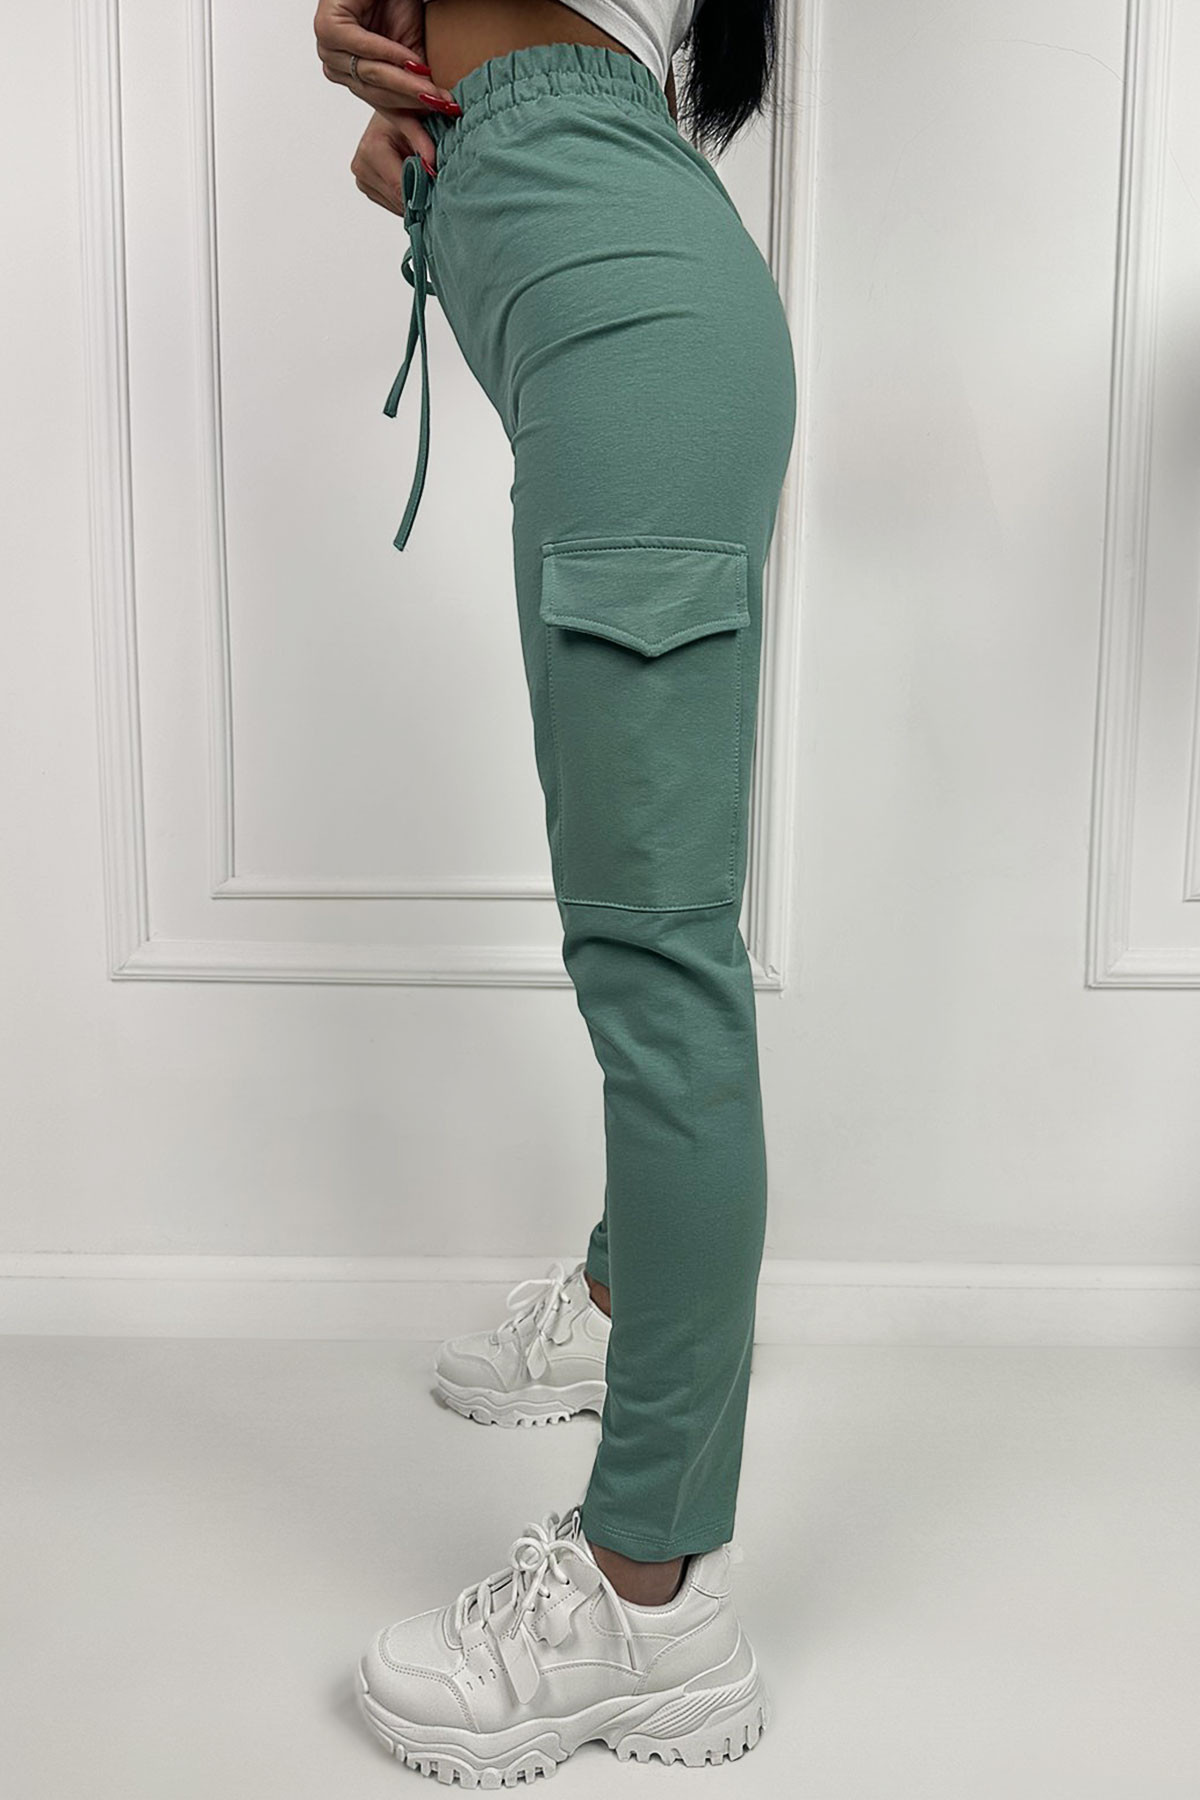 Womens sports pants with pockets   - Women's and men's clothing  and accessories at affordable prices.